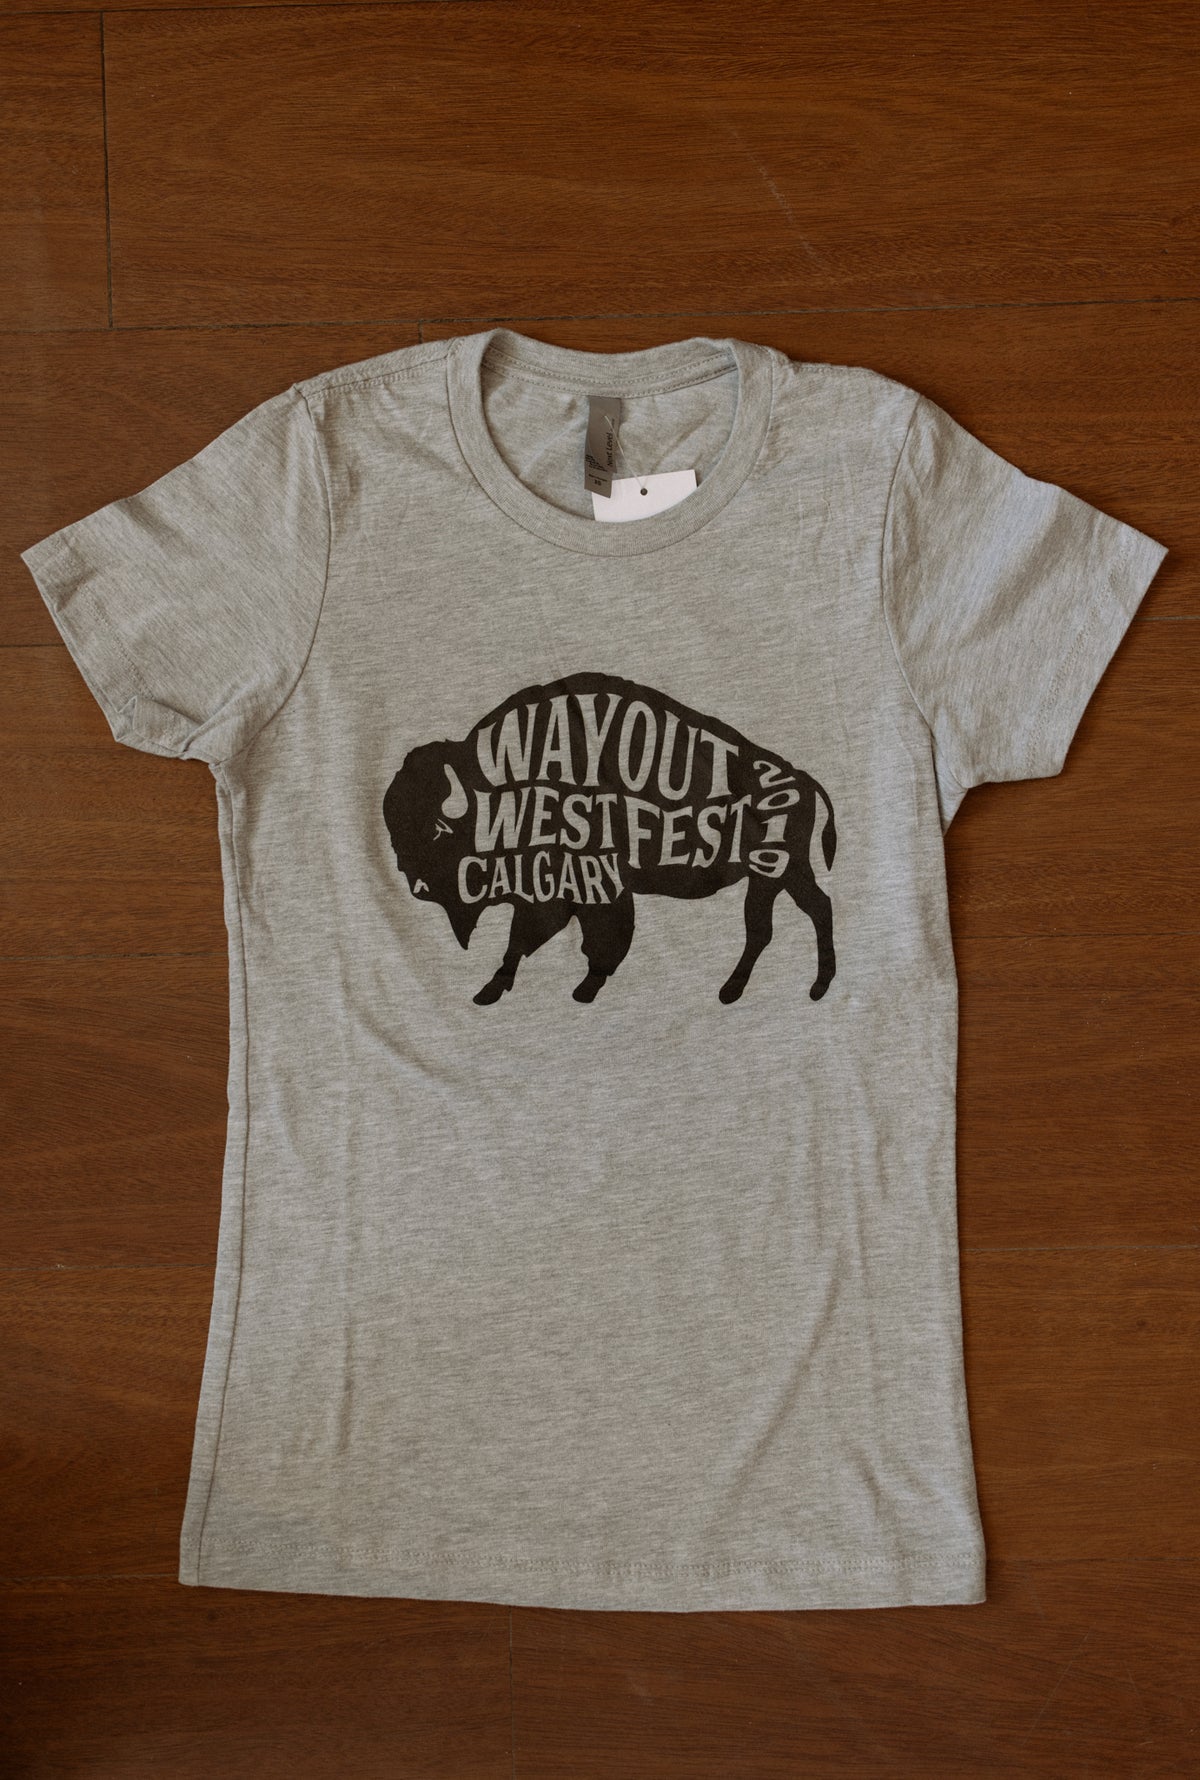 Way Out West Fest Ladies Tee (2019)